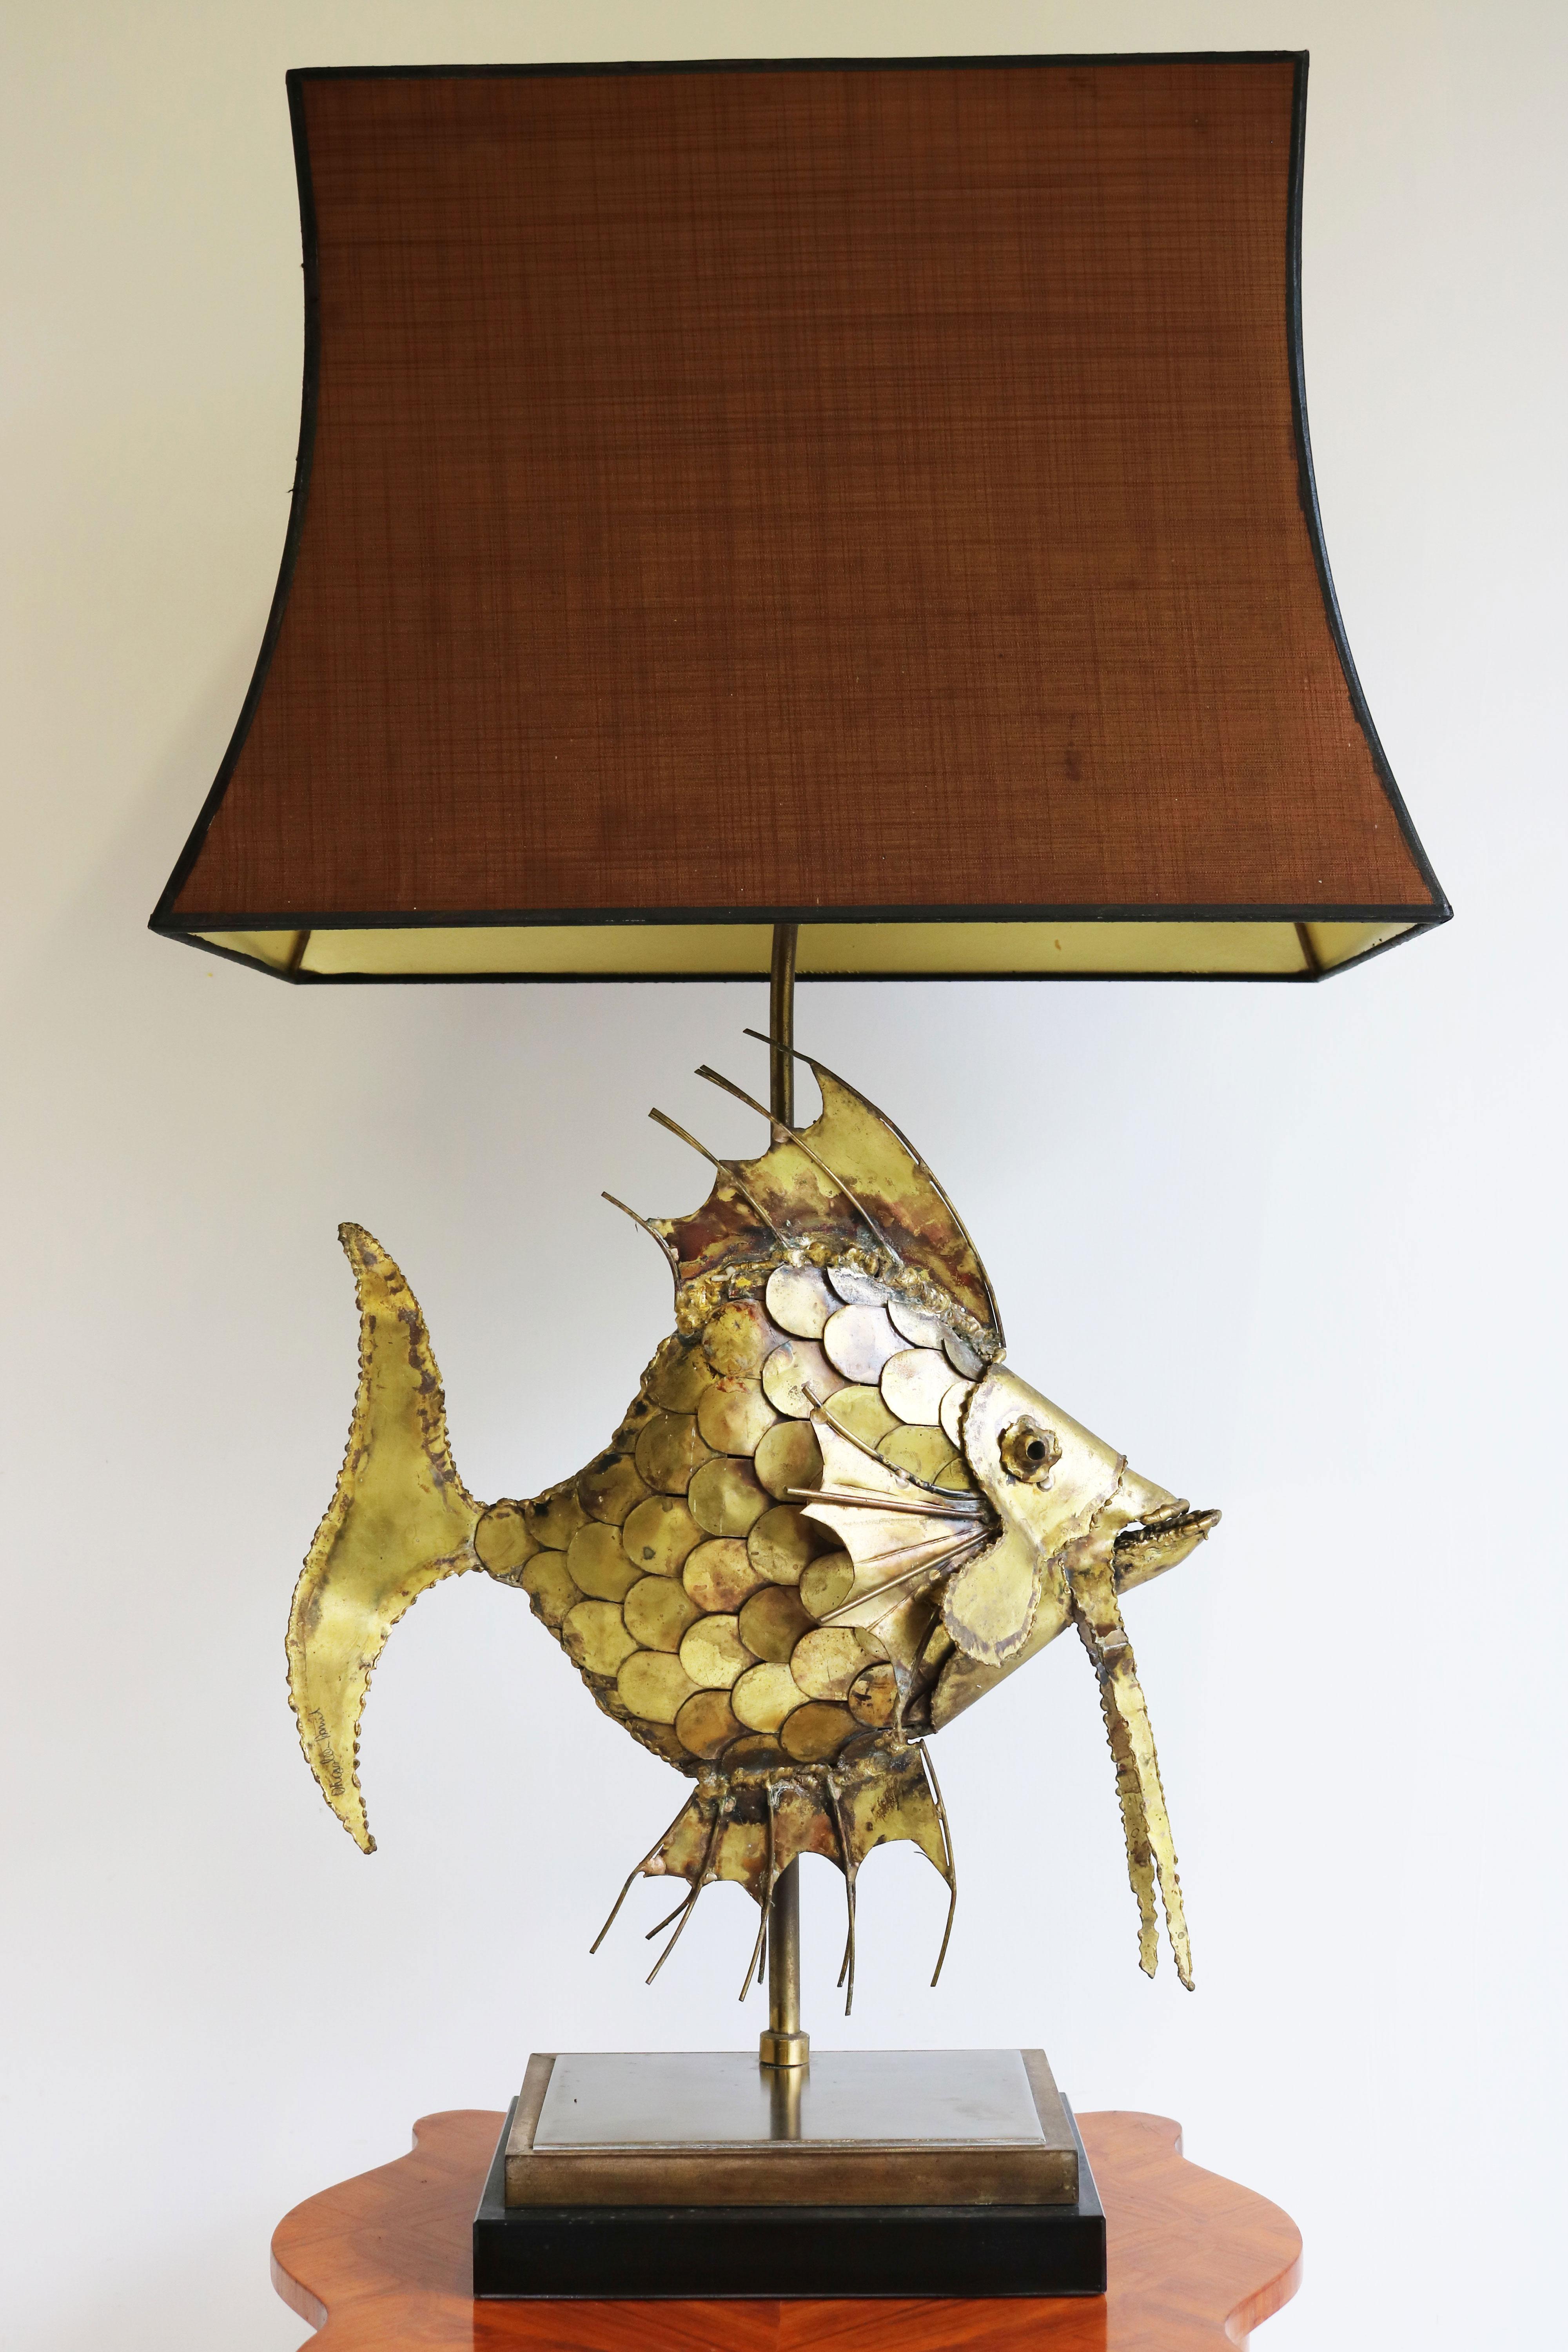 Hand-Crafted Design Brutalist Table Lamp in Brass by Daniel d'haeseleer 1970 Fish Sculpture For Sale